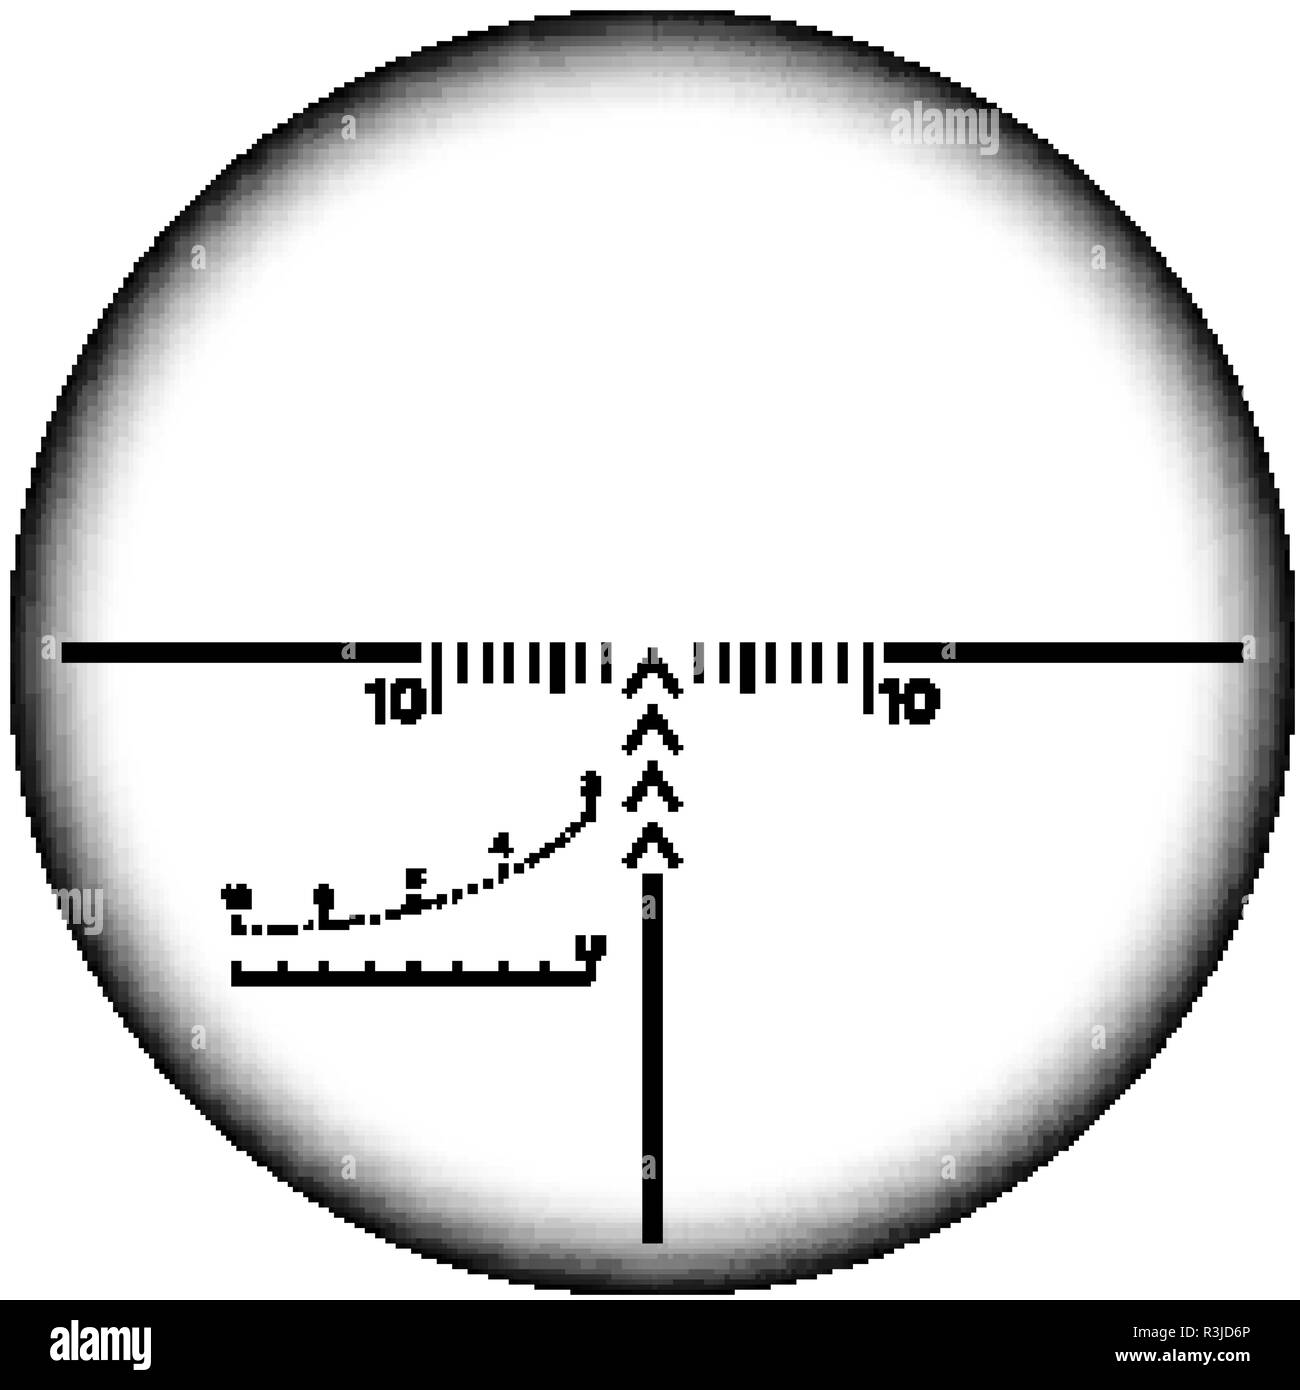 Collimator sight icon. Military sniper rifle target crosshairs Stock Vector